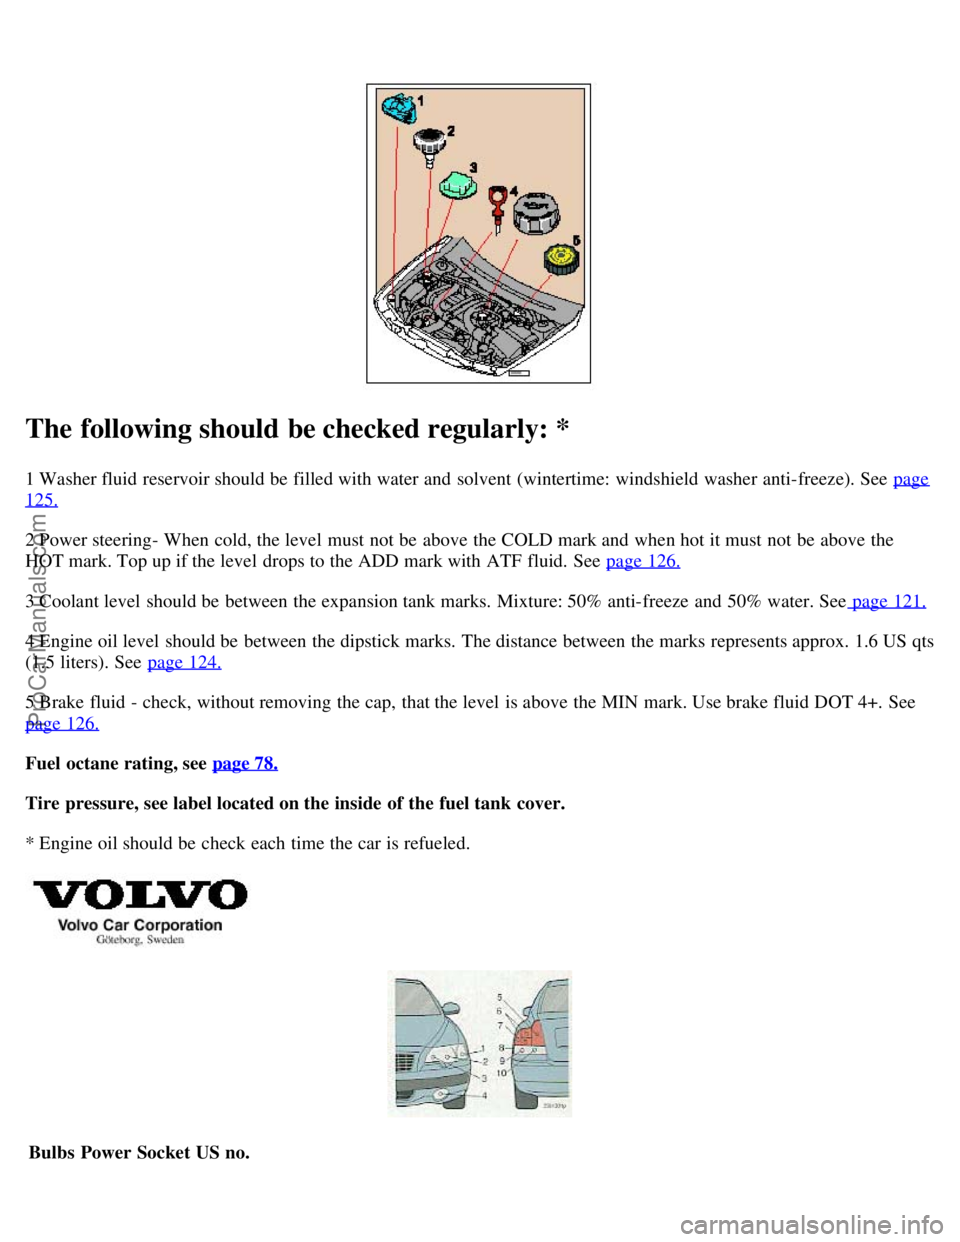 VOLVO S60 2003  Owners Manual The following should be checked regularly: *
1 Washer fluid reservoir should be  filled with water and  solvent (wintertime:  windshield washer anti-freeze). See  page
125.
2 Power steering- When cold